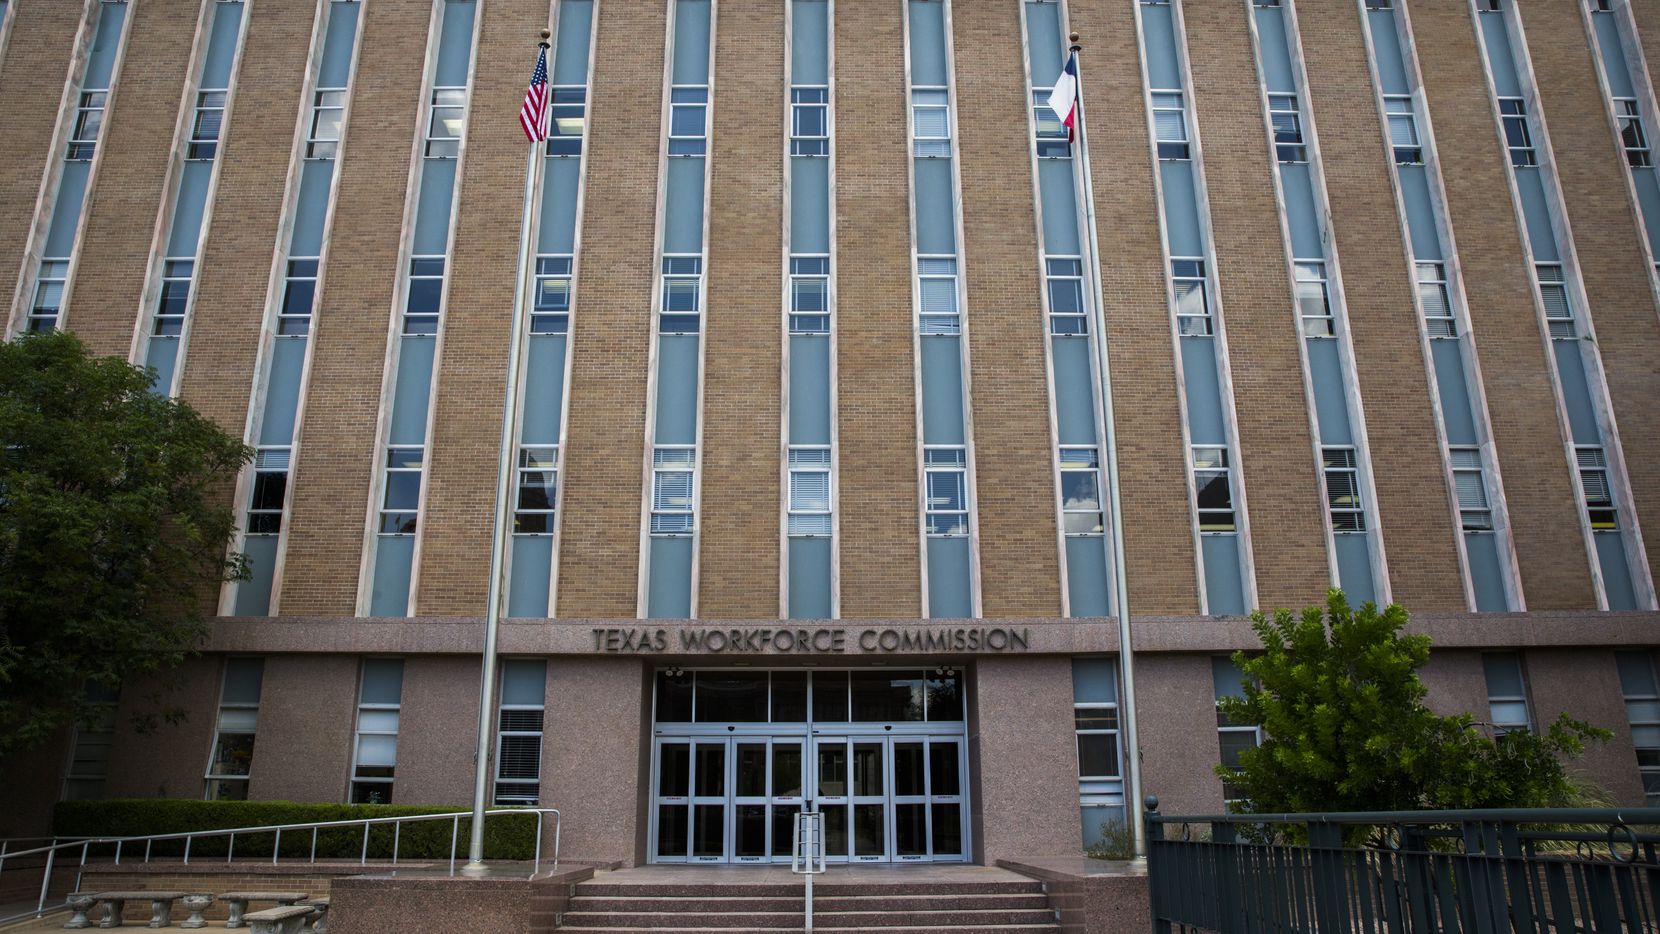 The Texas Workforce Commission building near the Texas state capitol in Austin.